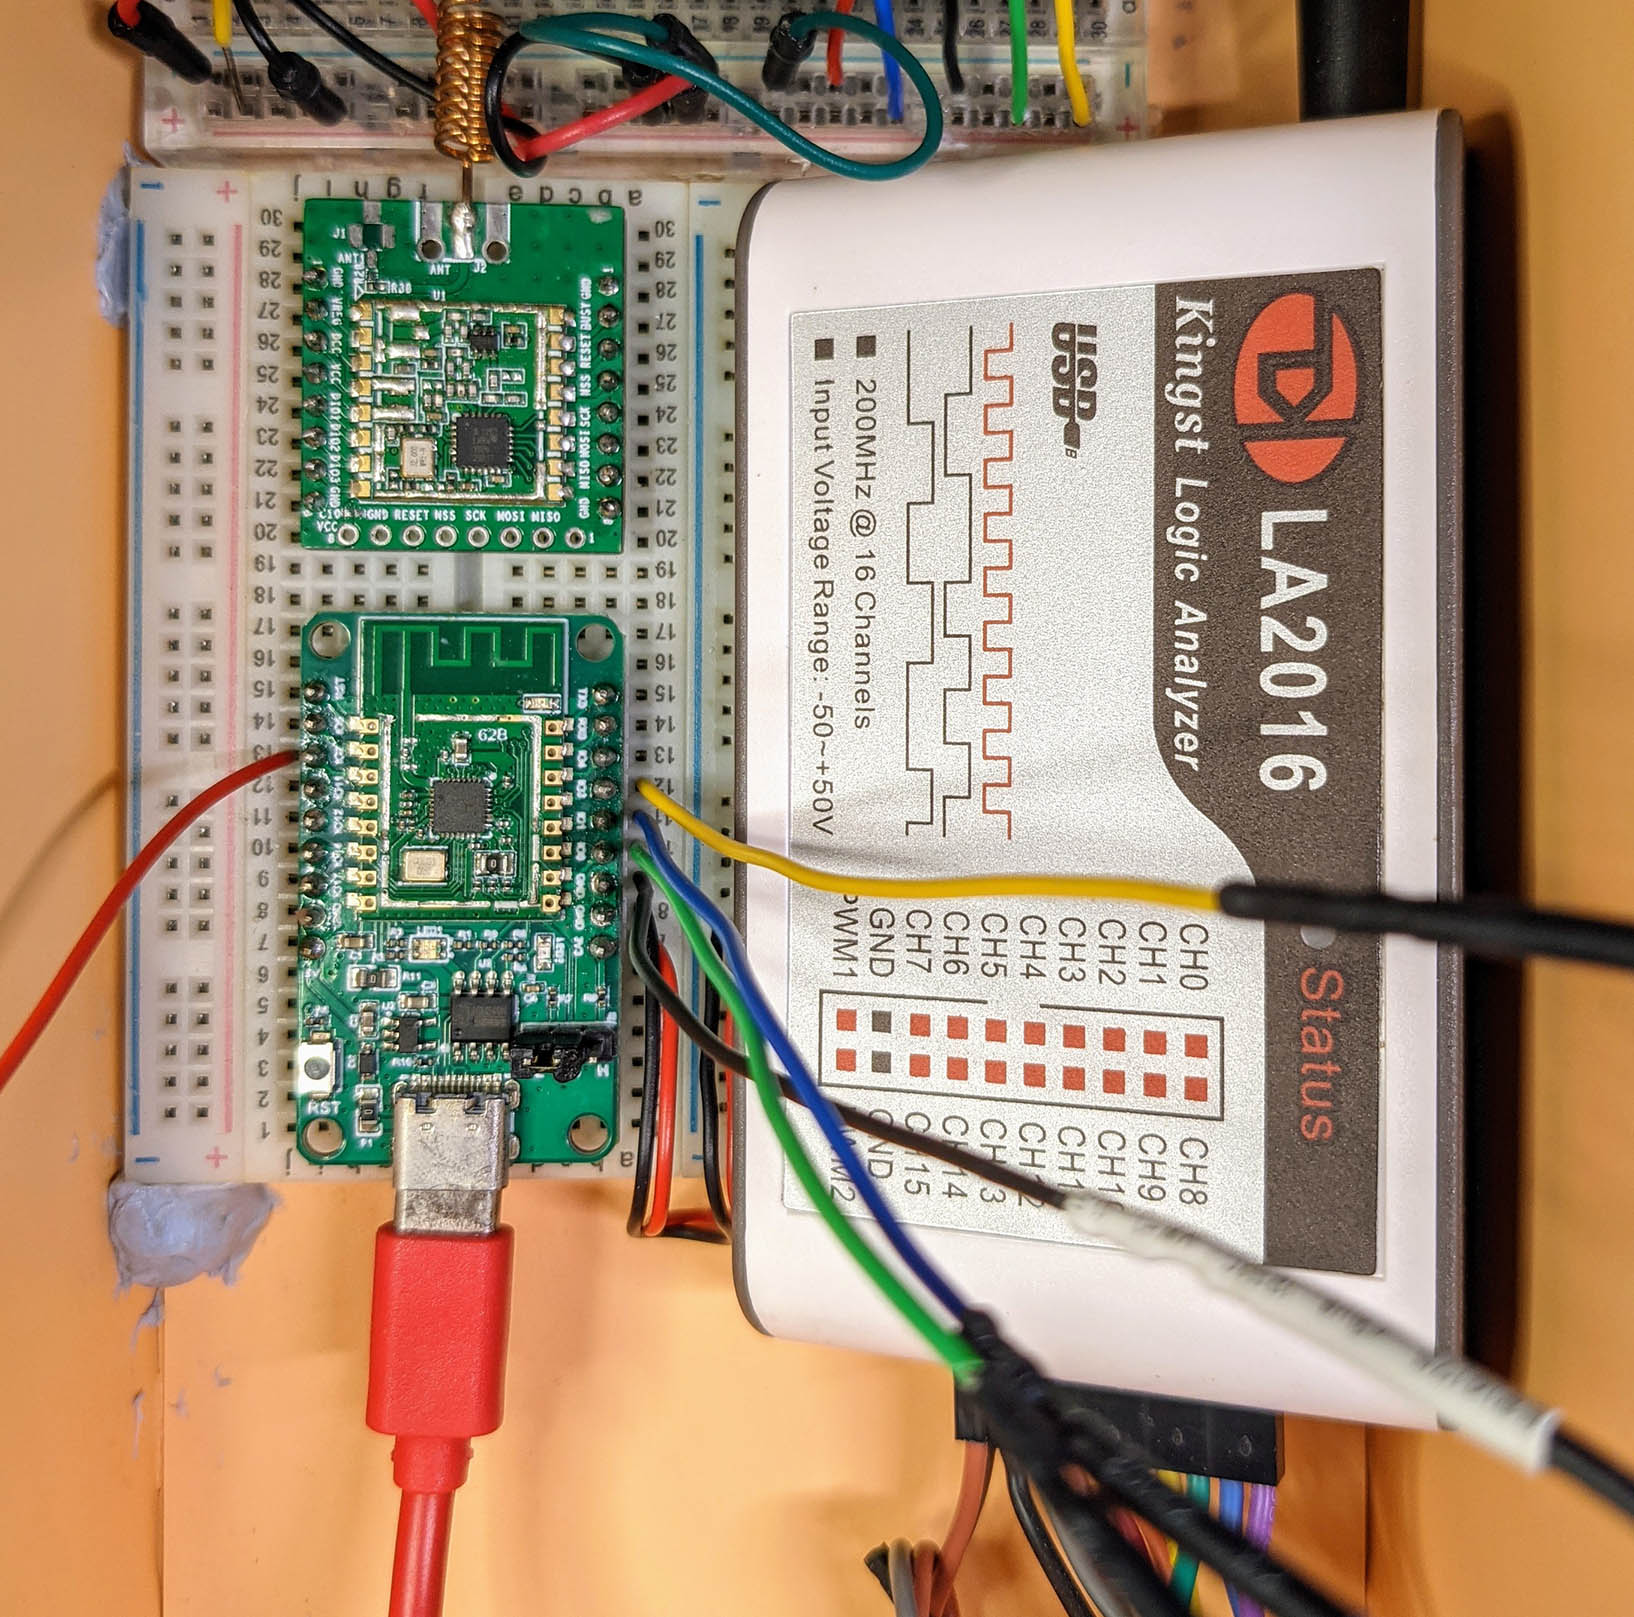 Logic Analyser connected to PineCone BL602